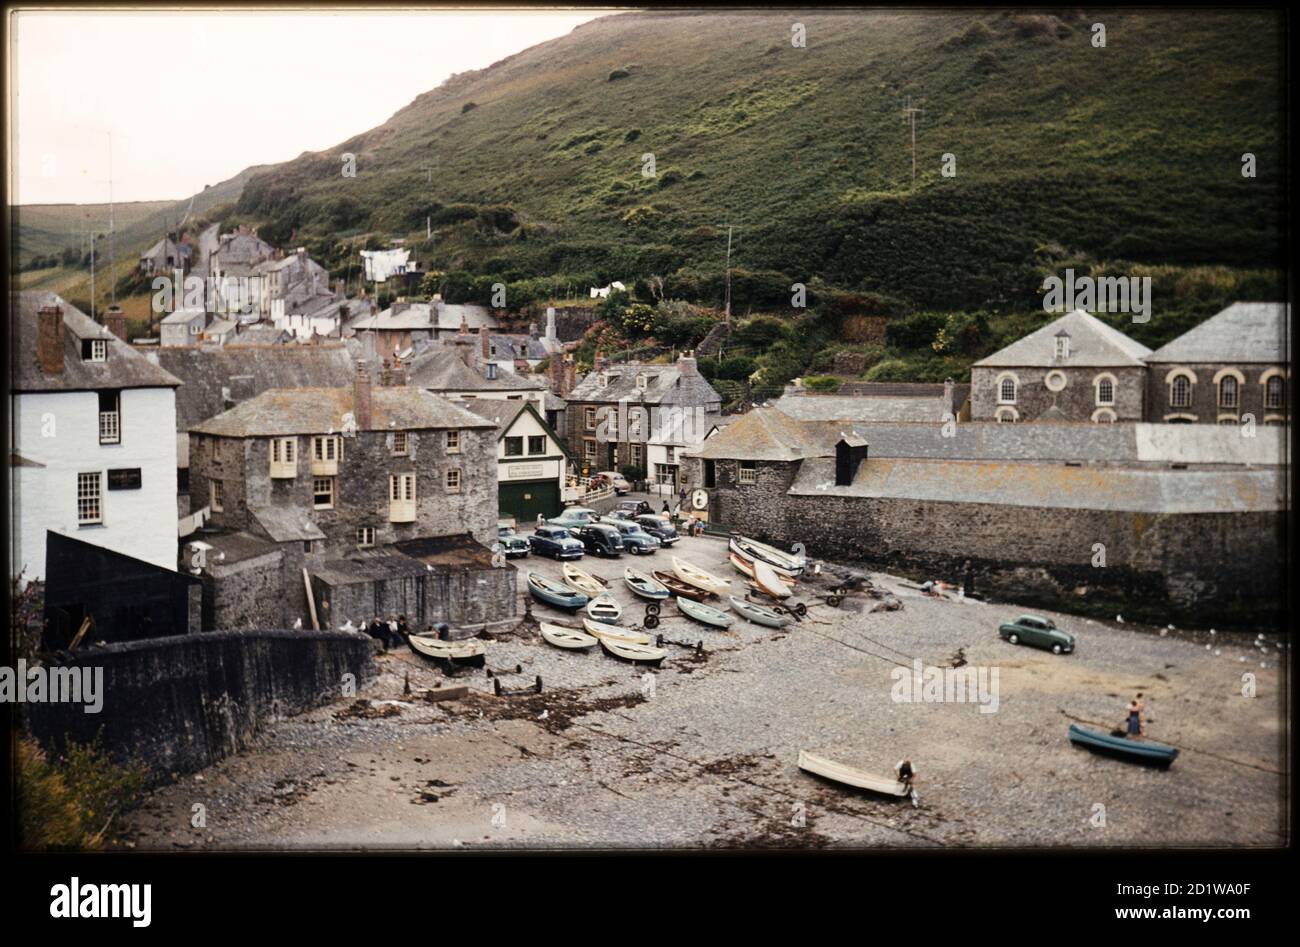 The Haven, Port Isaac, St. Endellion, Cornwall. Looking south over The Haven and the Platt, with small boats beached on the shingle and slipway, and the village beyond. Stock Photo